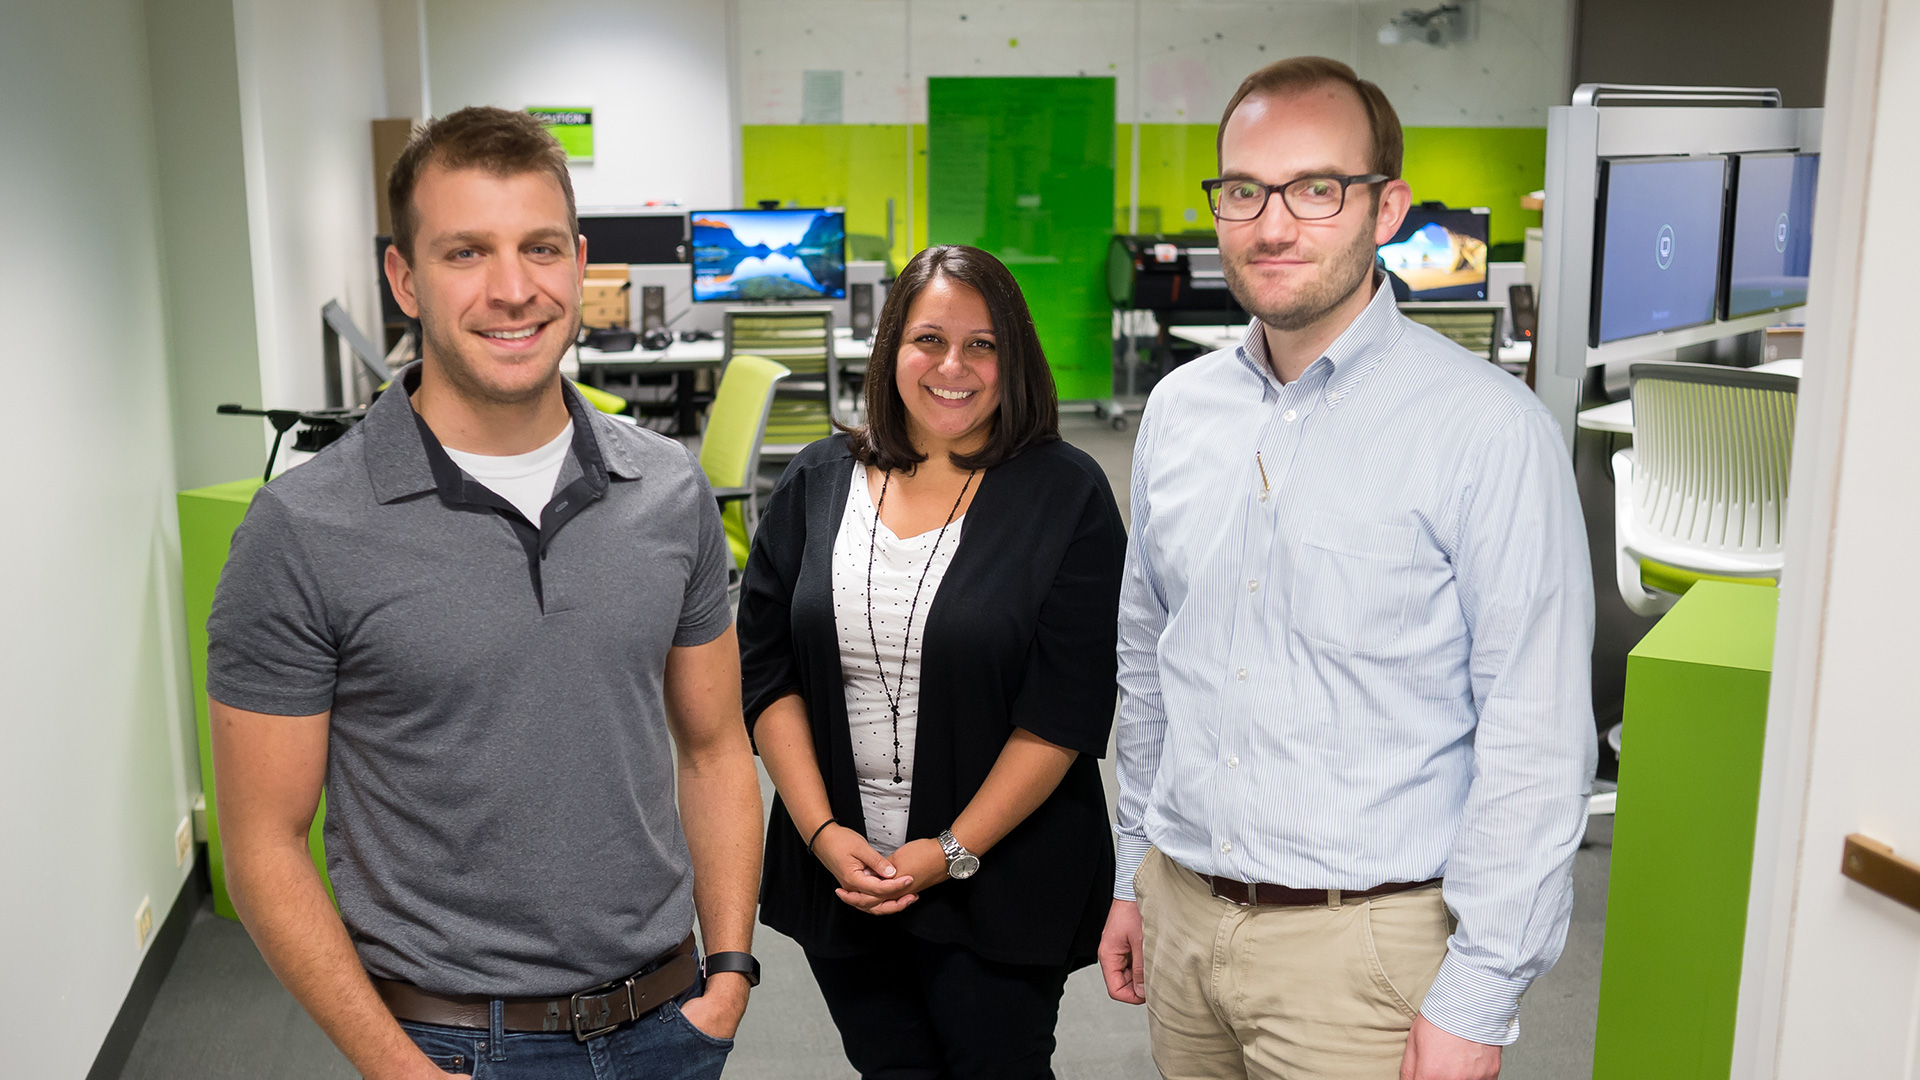 (From left) Scott Schlueter, Carmella Burdi and Tom Wall of the GRID-M team. Not pictured from the GRID-M team is Kyle Pfeiffer. (Image by Argonne National Laboratory.)